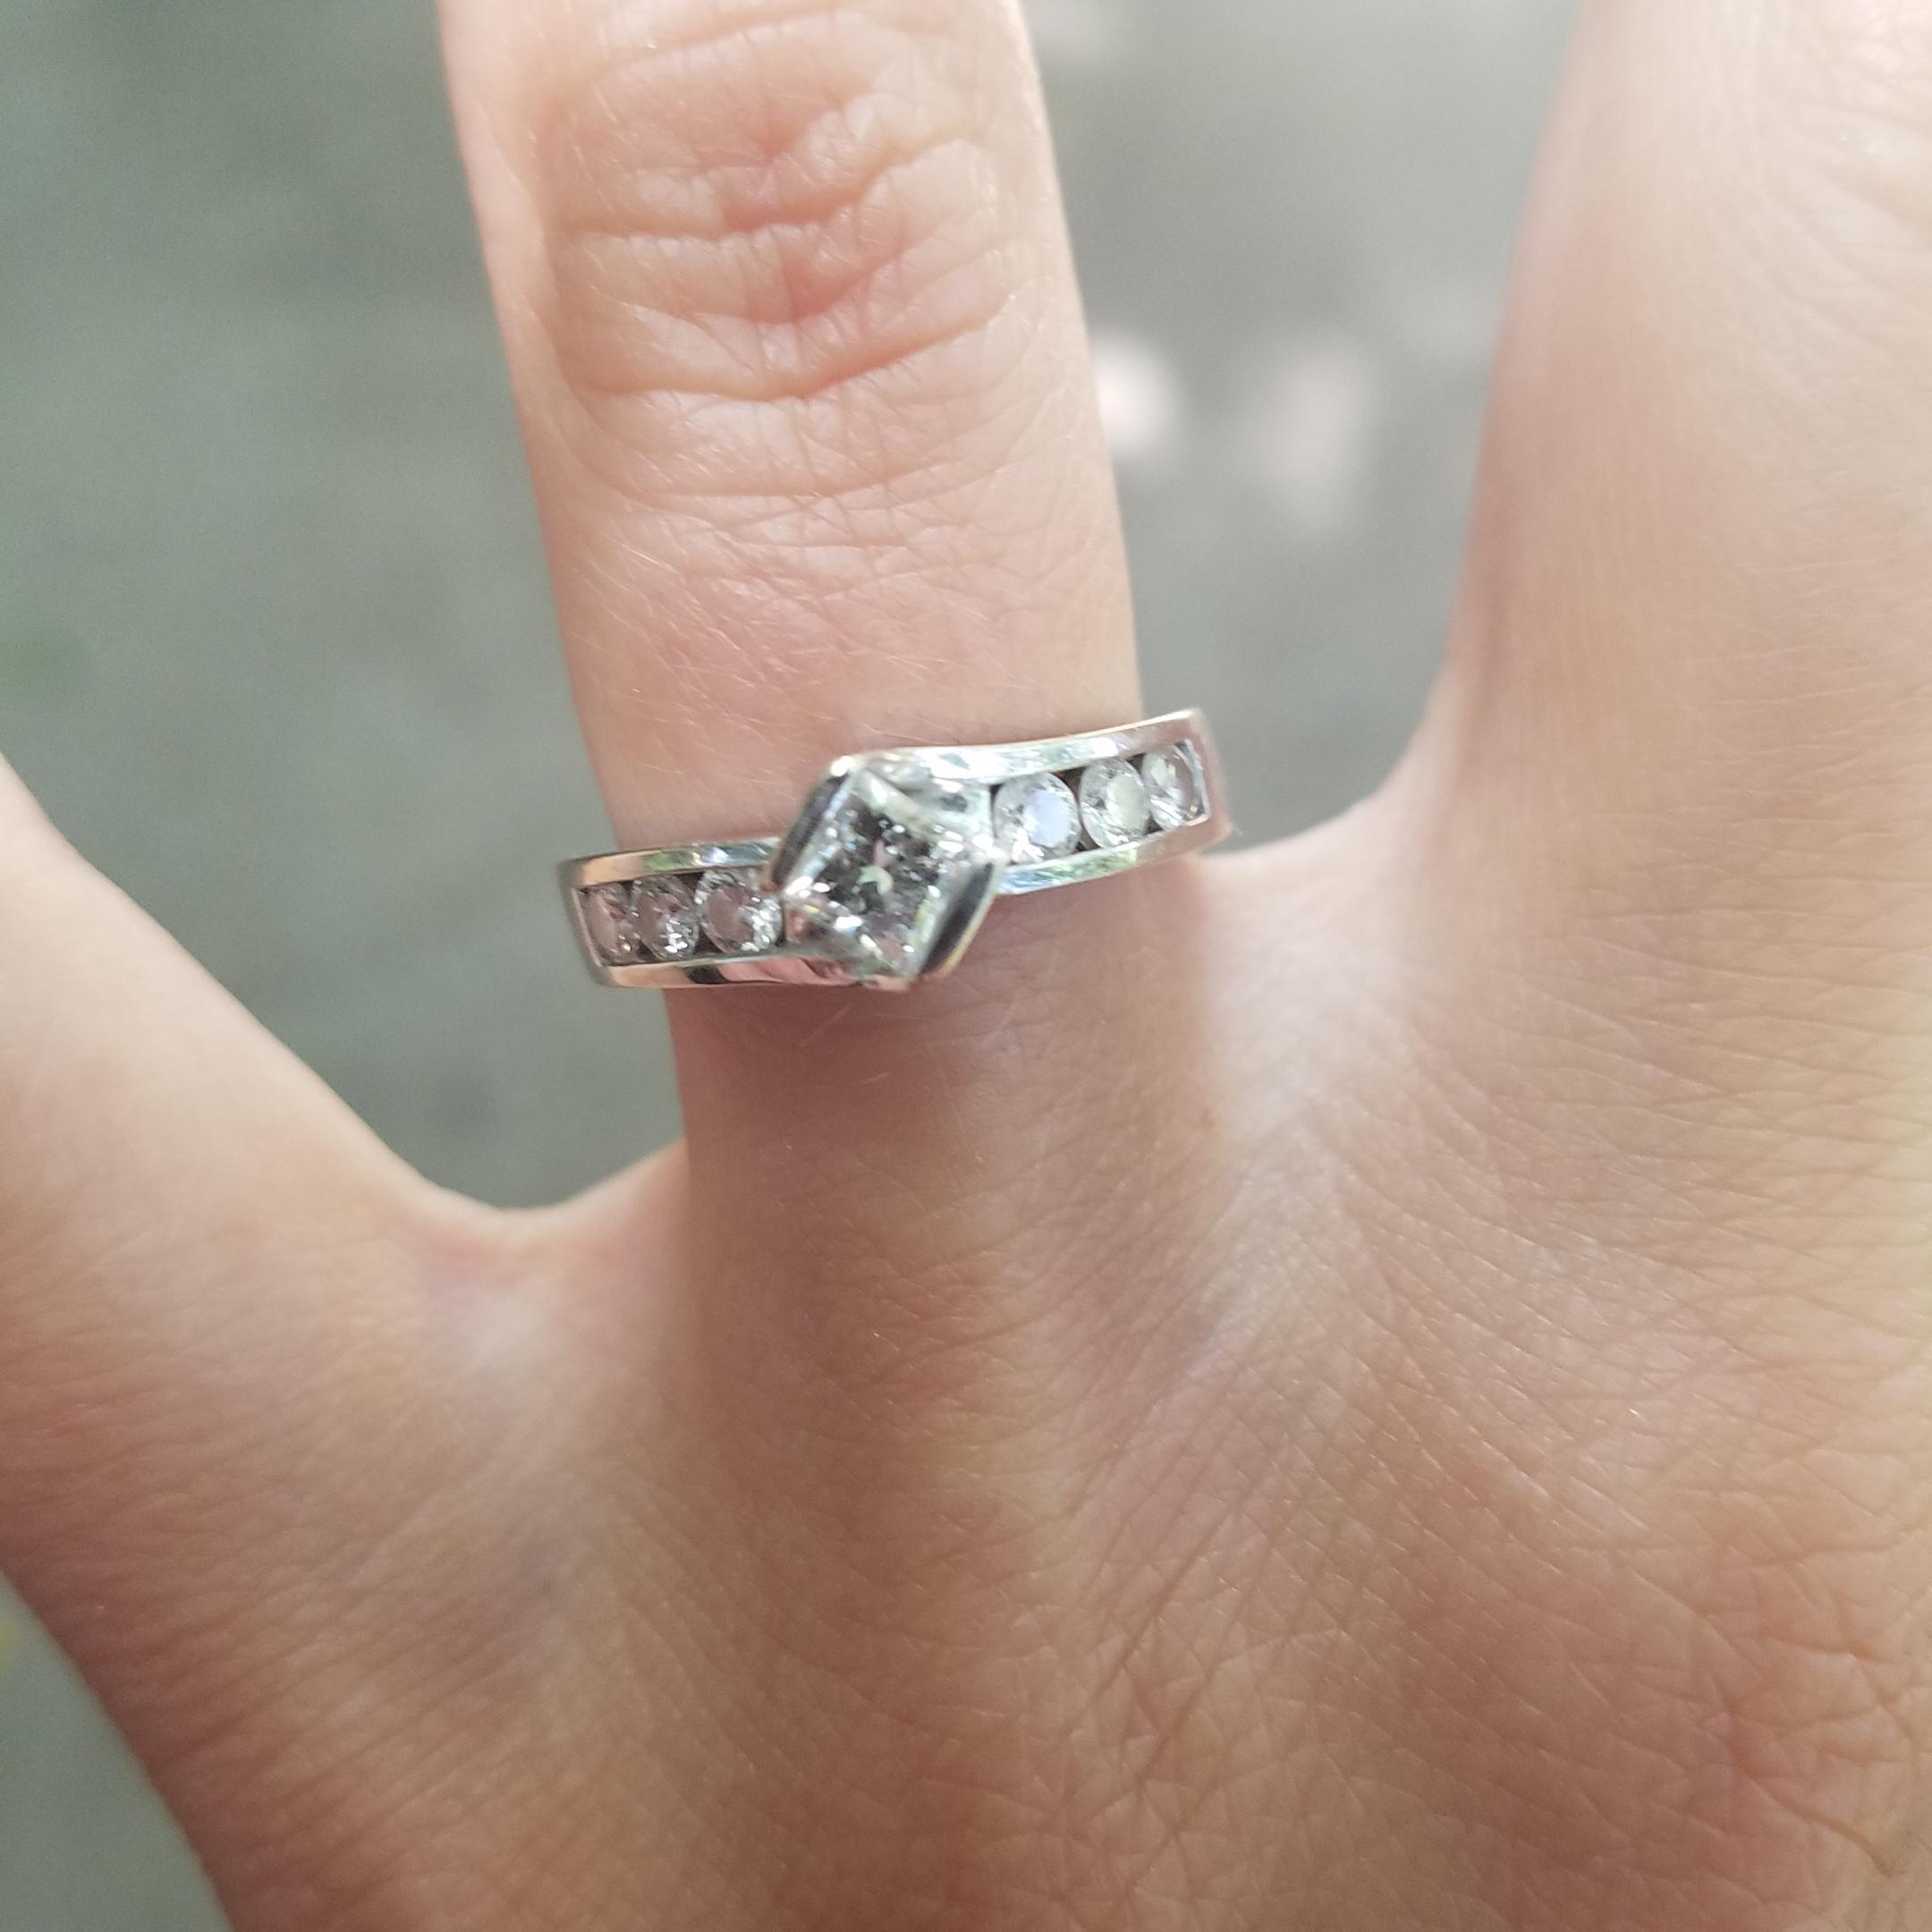 HELP! Cant find wedding band that fits! : weddingring